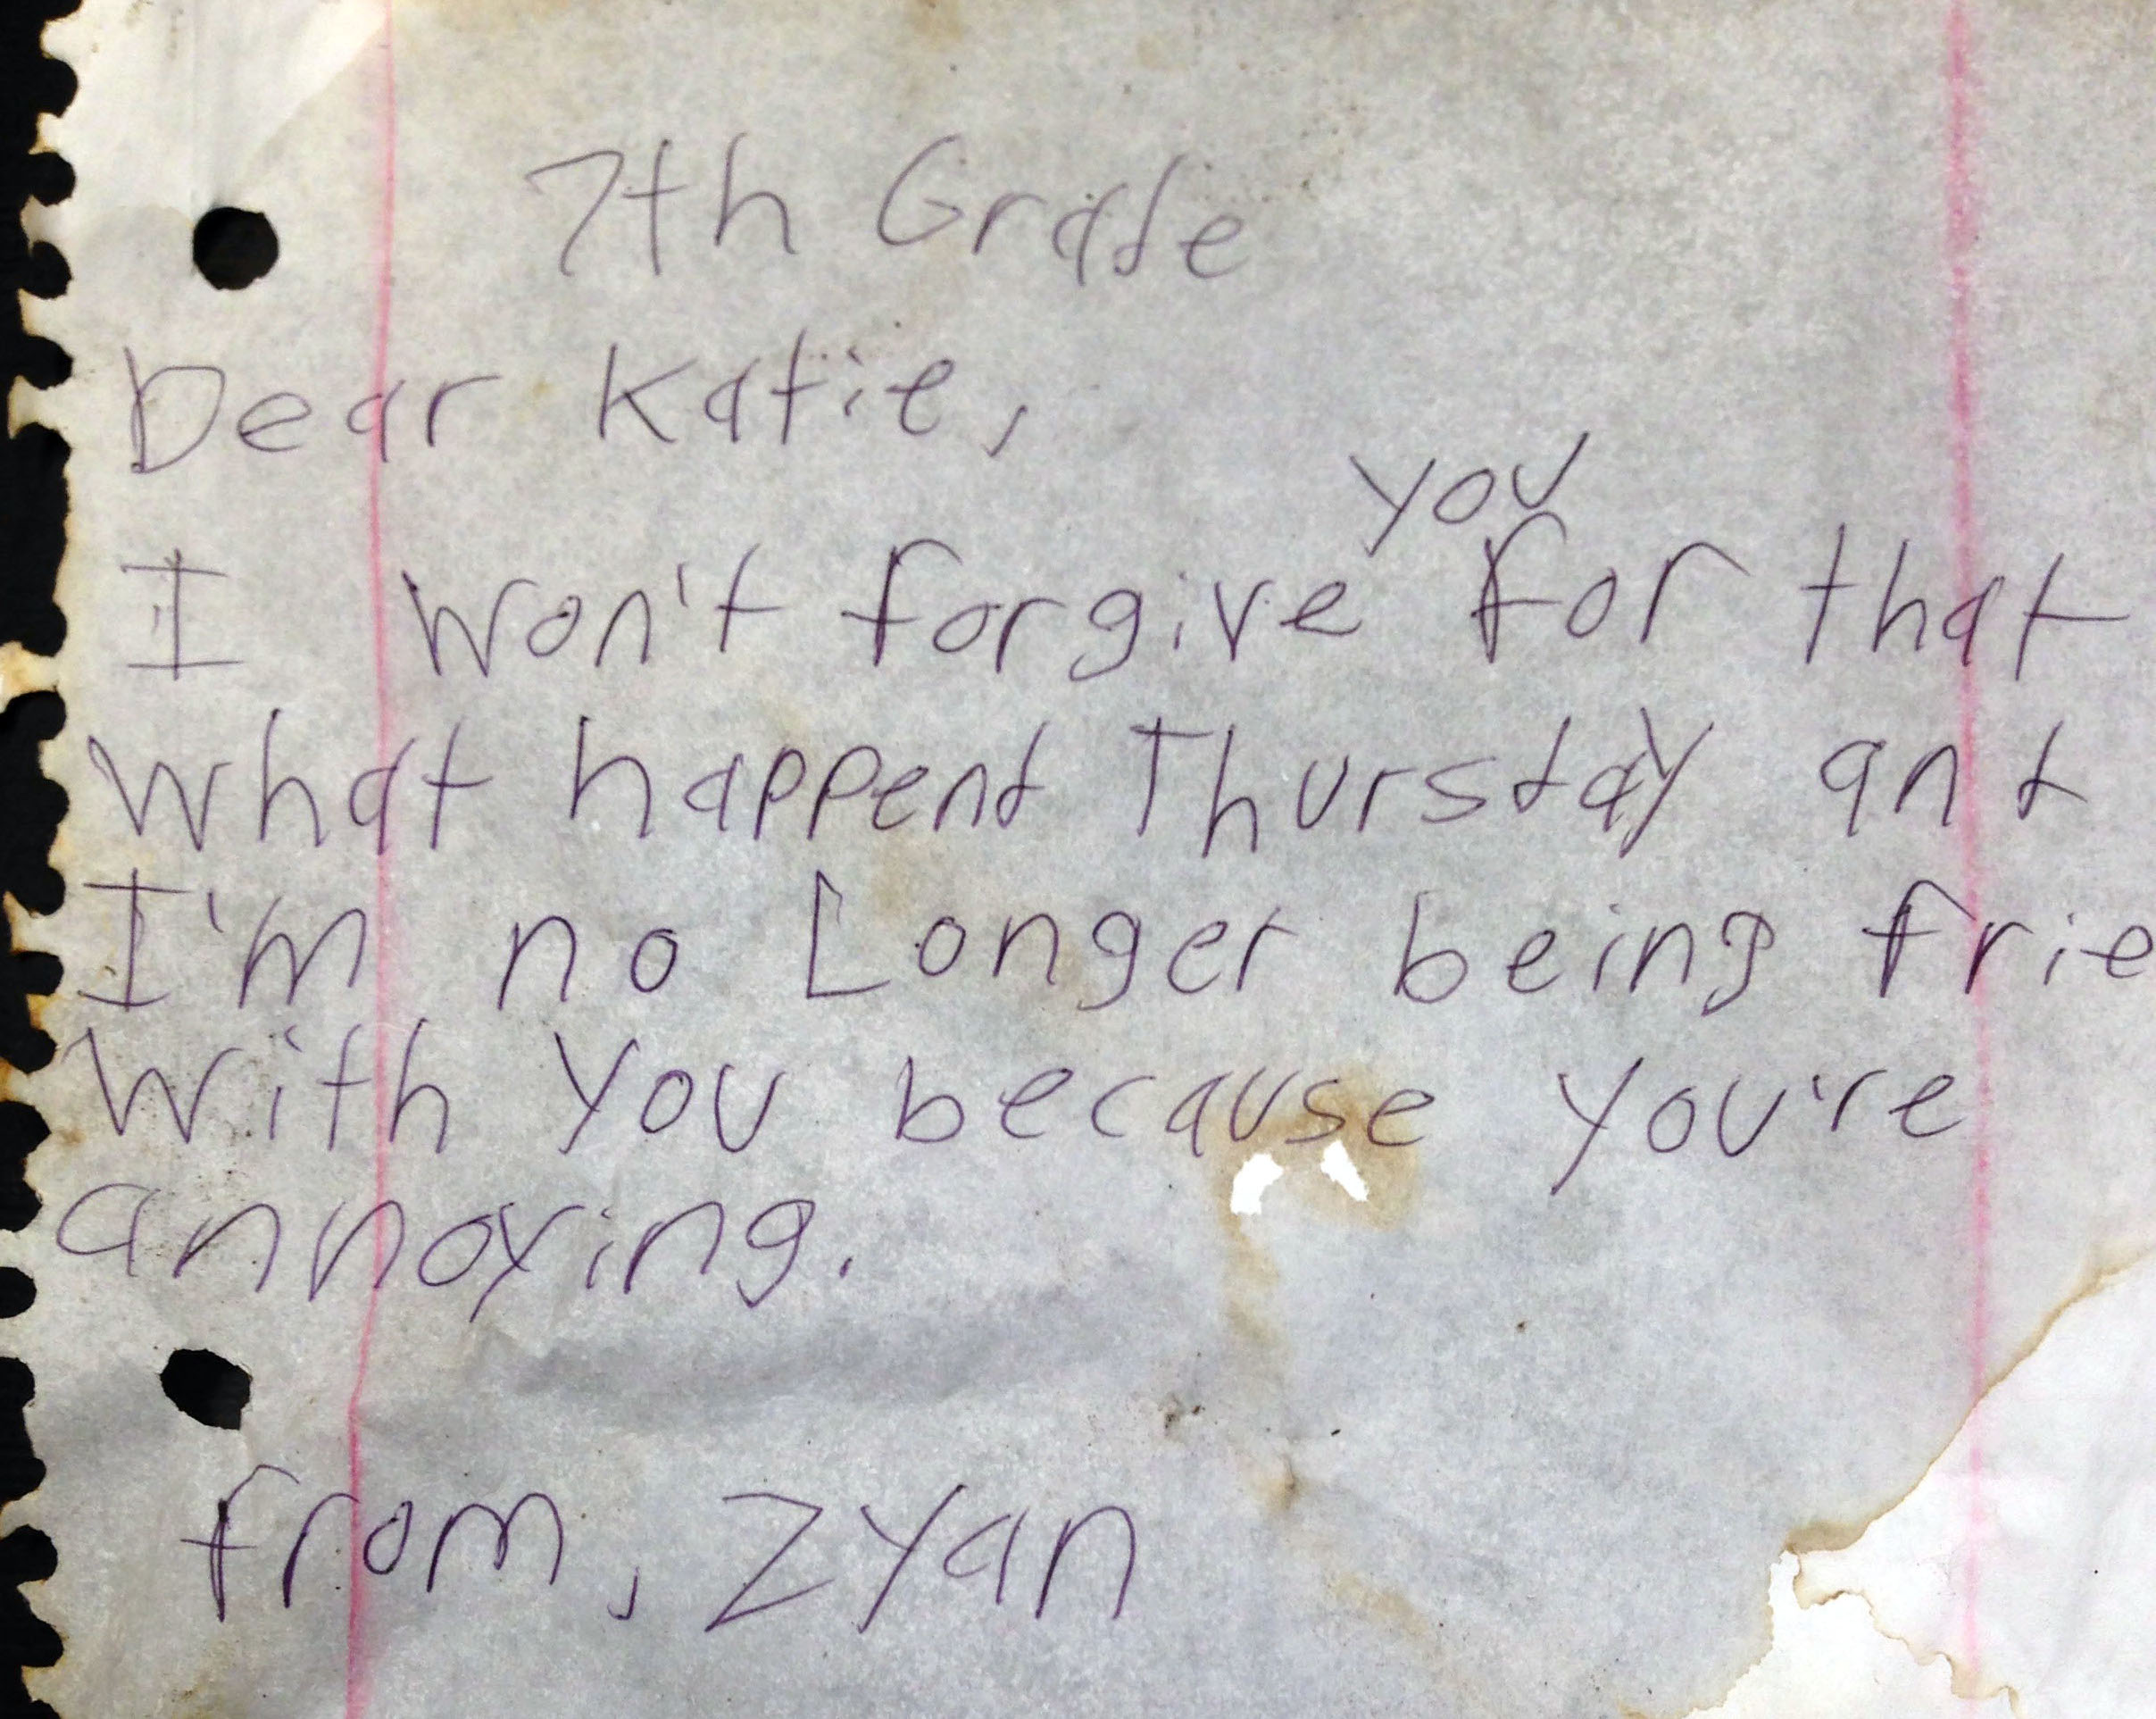 FOUND scrap note says: &ldquo;7th Grade. Dear Katie, I won&rsquo;t forgive you for that what happend Thursday ant I&rsquo;m no Longer being frie with you because you&rsquo;re annoying. from, Zyan&rdquo;